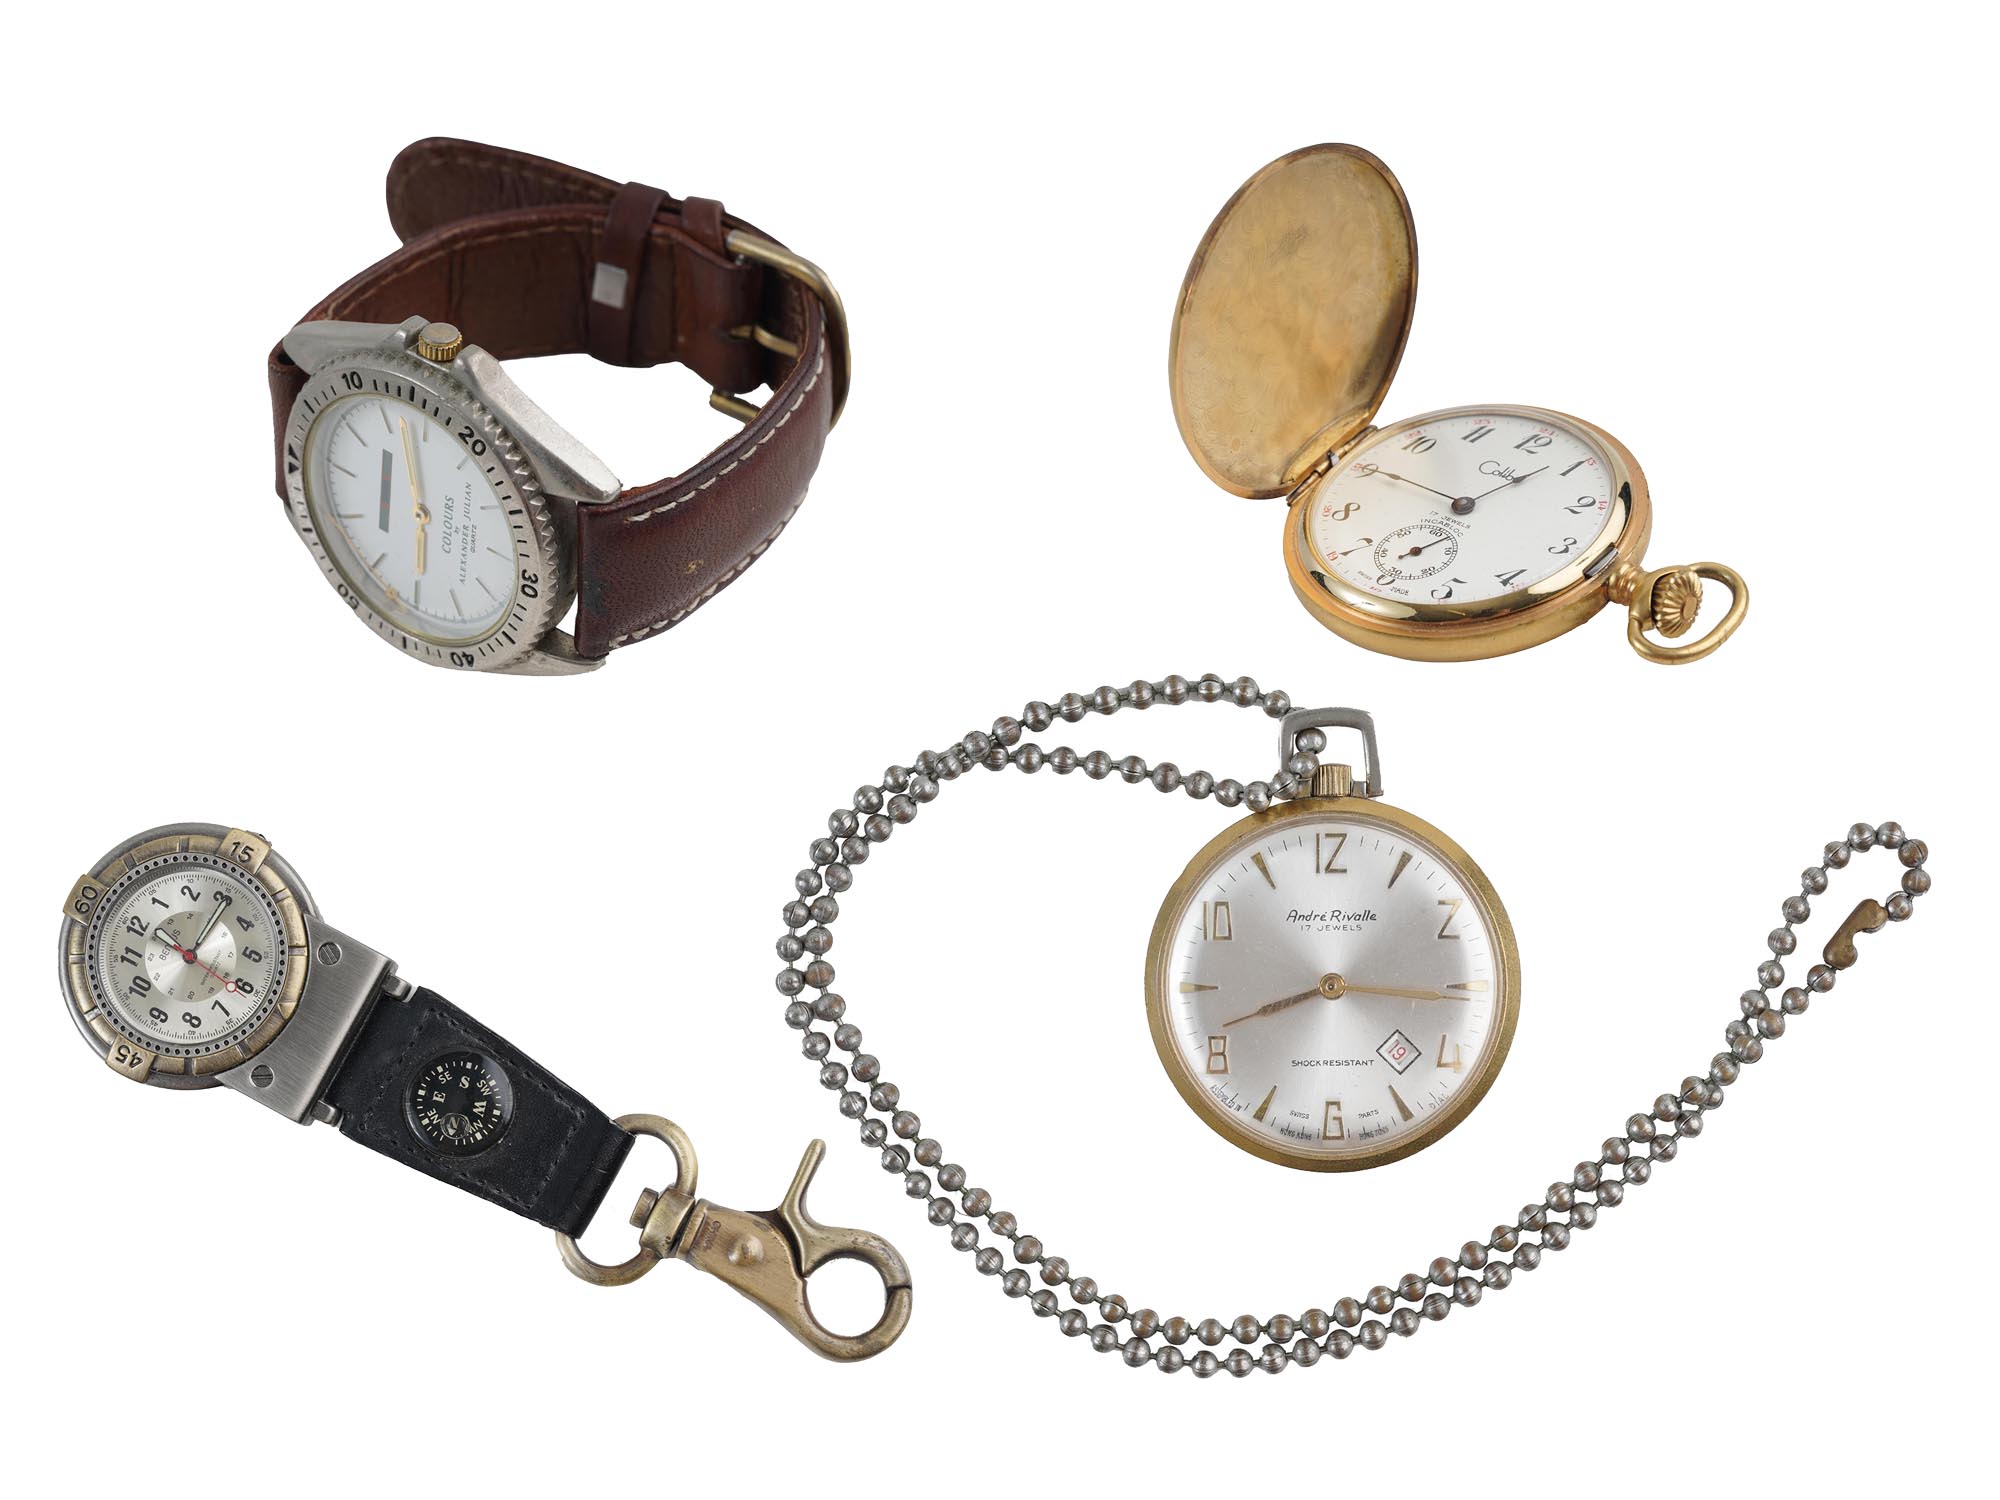 POCKET AND WRIST WATCHES BY ANDRE RIVALLE COLIBRI PIC-0